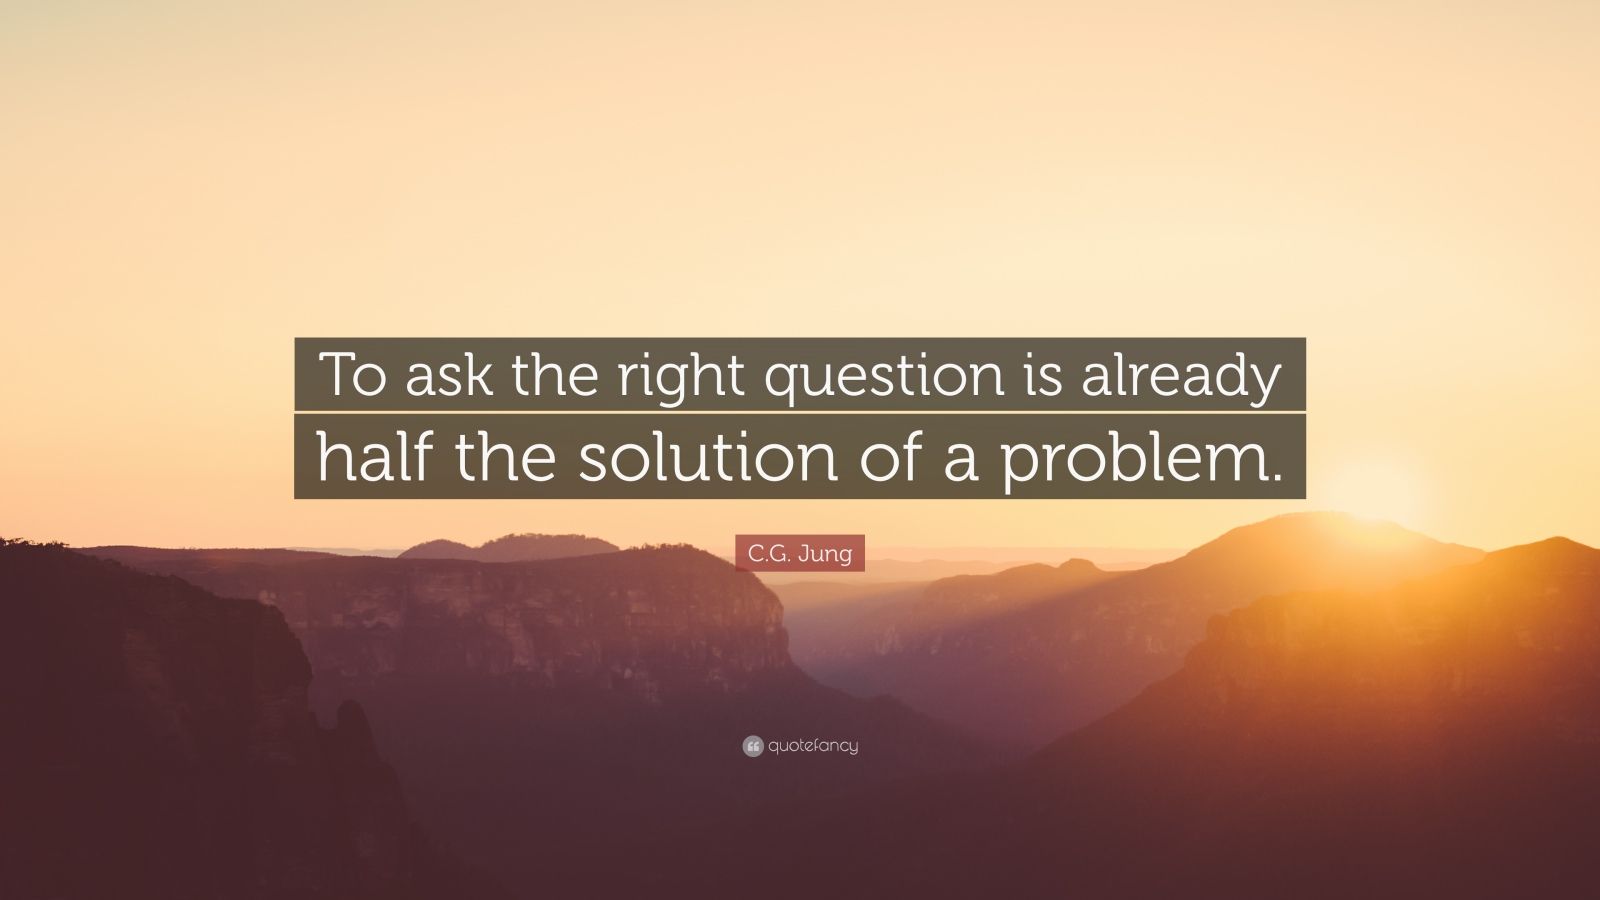 C.G. Jung Quote: “To ask the right question is already half the